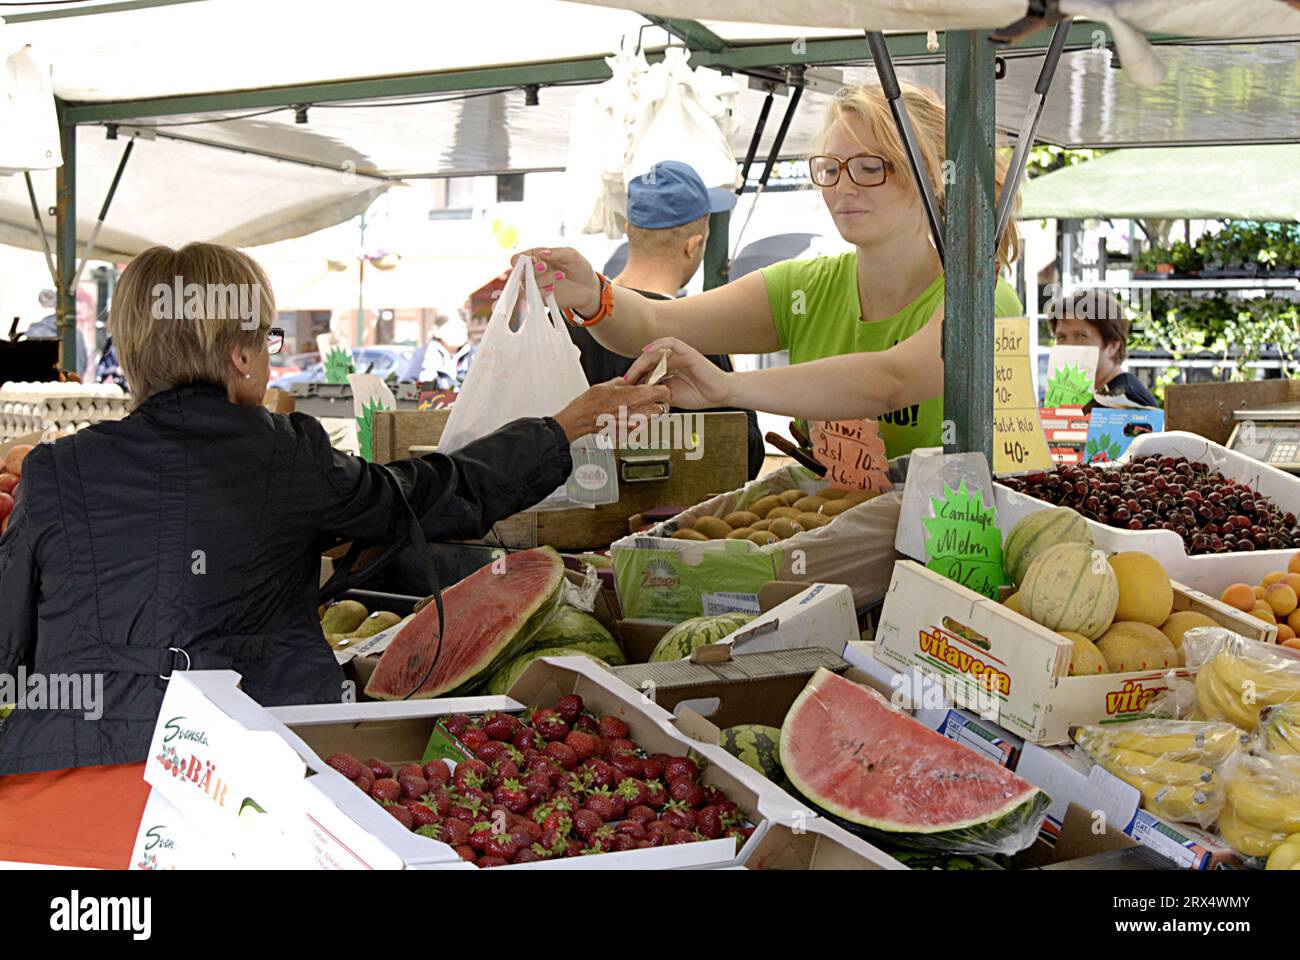 MALMO/MALMÖ/SVERIGE / SWEDEN  Female fruit consumers buying fruit and paying money for fruit 17 June 2013           (Photo by Francis Joseph  Dean / Deanpictures) Stock Photo